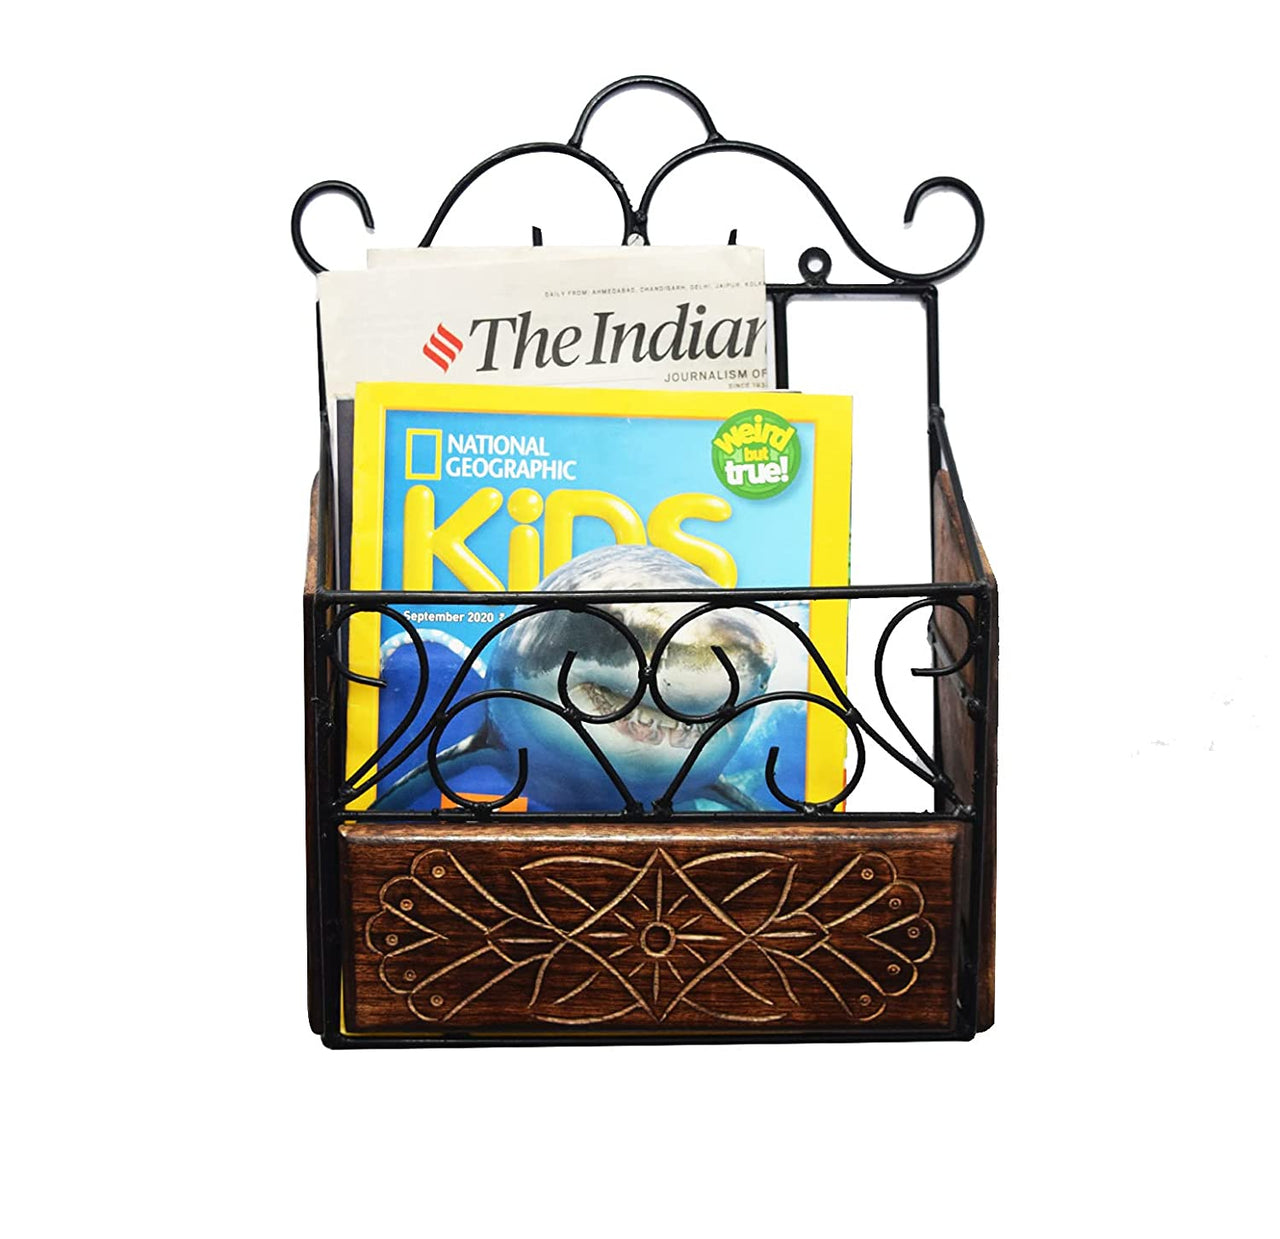 Wrought Iron Wall Mount Magazine Holder for Home | Newspaper, Book Holder Multipurpose Basket Organizer for Home Dime Store